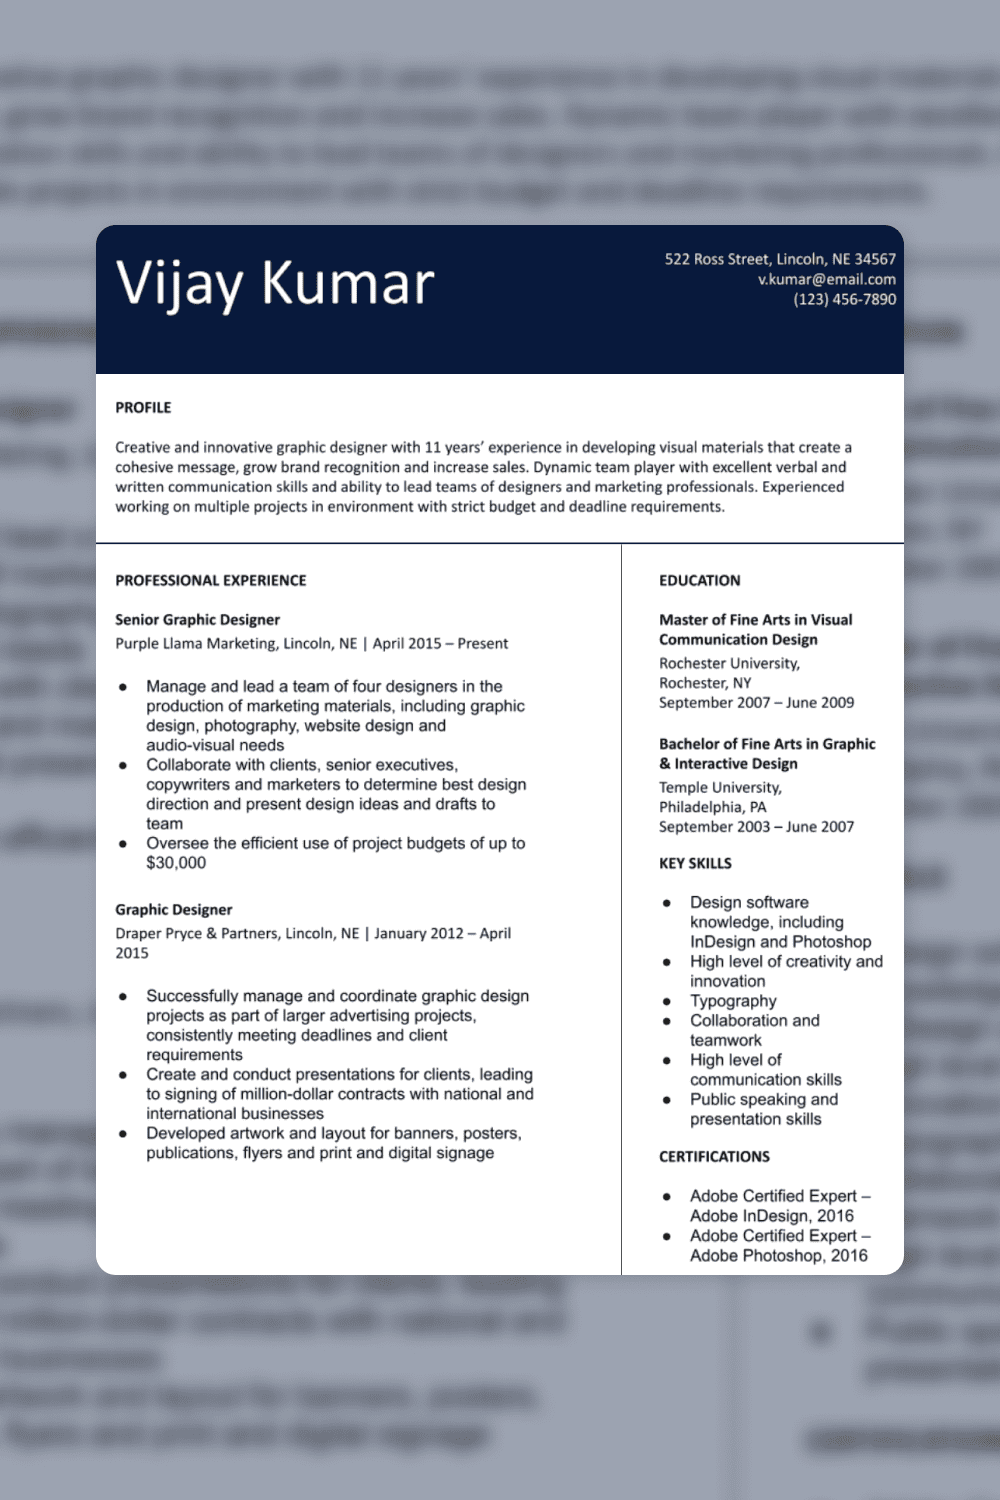 Resume image with text in one column and then in two columns.